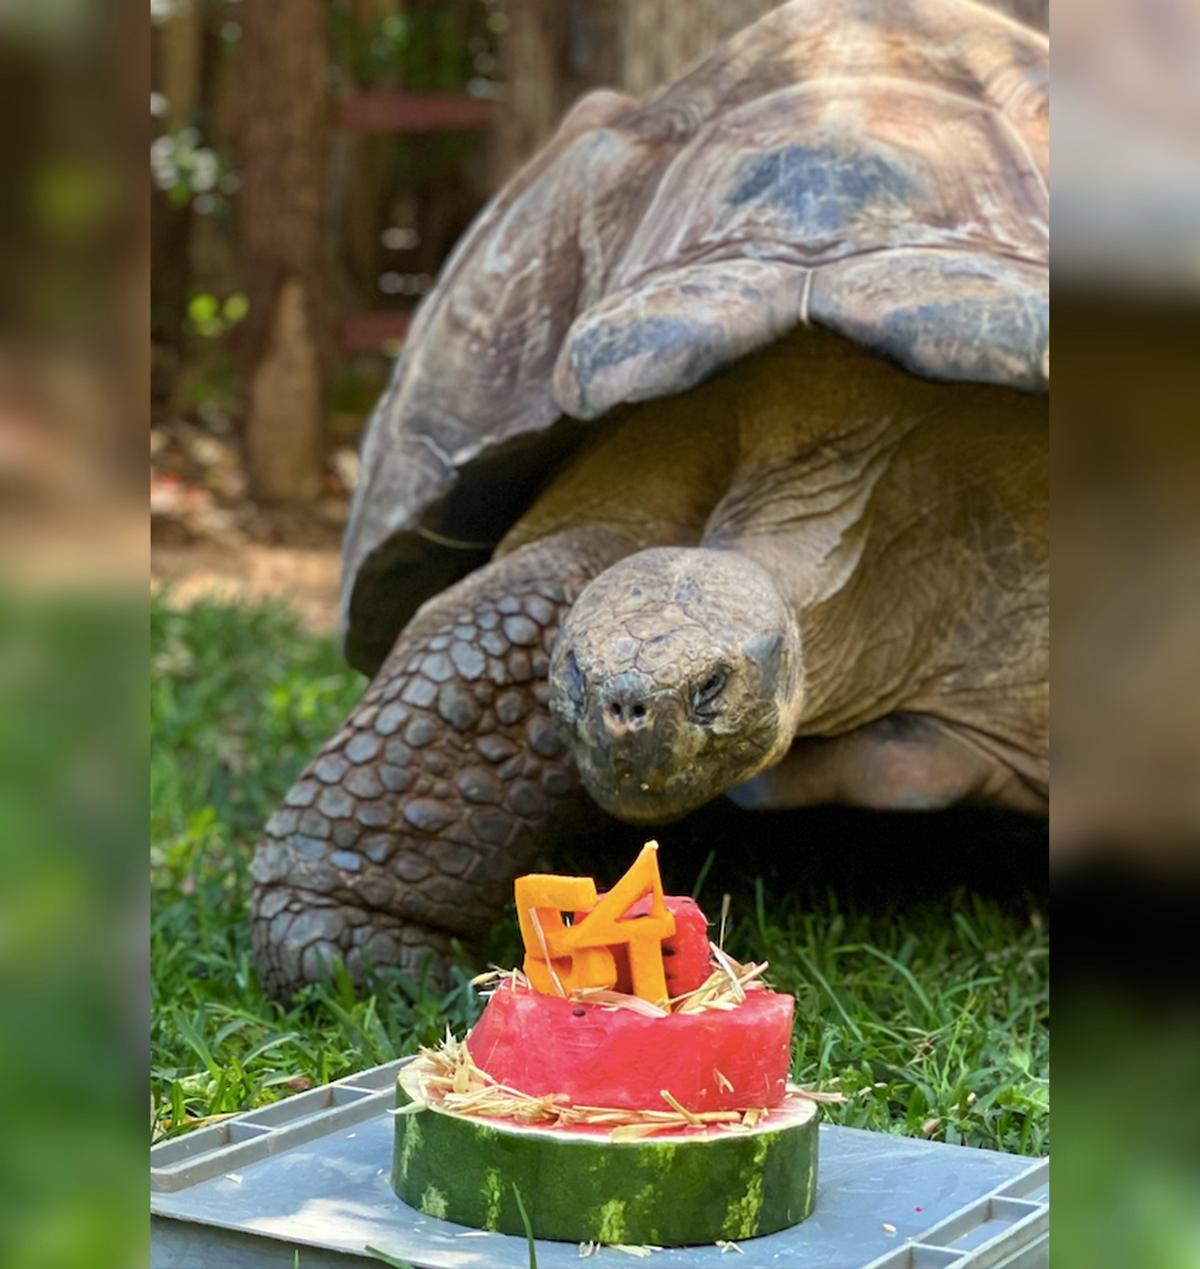  Galapagos tortoise Cerro celebrates his 54th birthday with a watermelon cake at Perth Zoo, Western Australia. (Caters News)